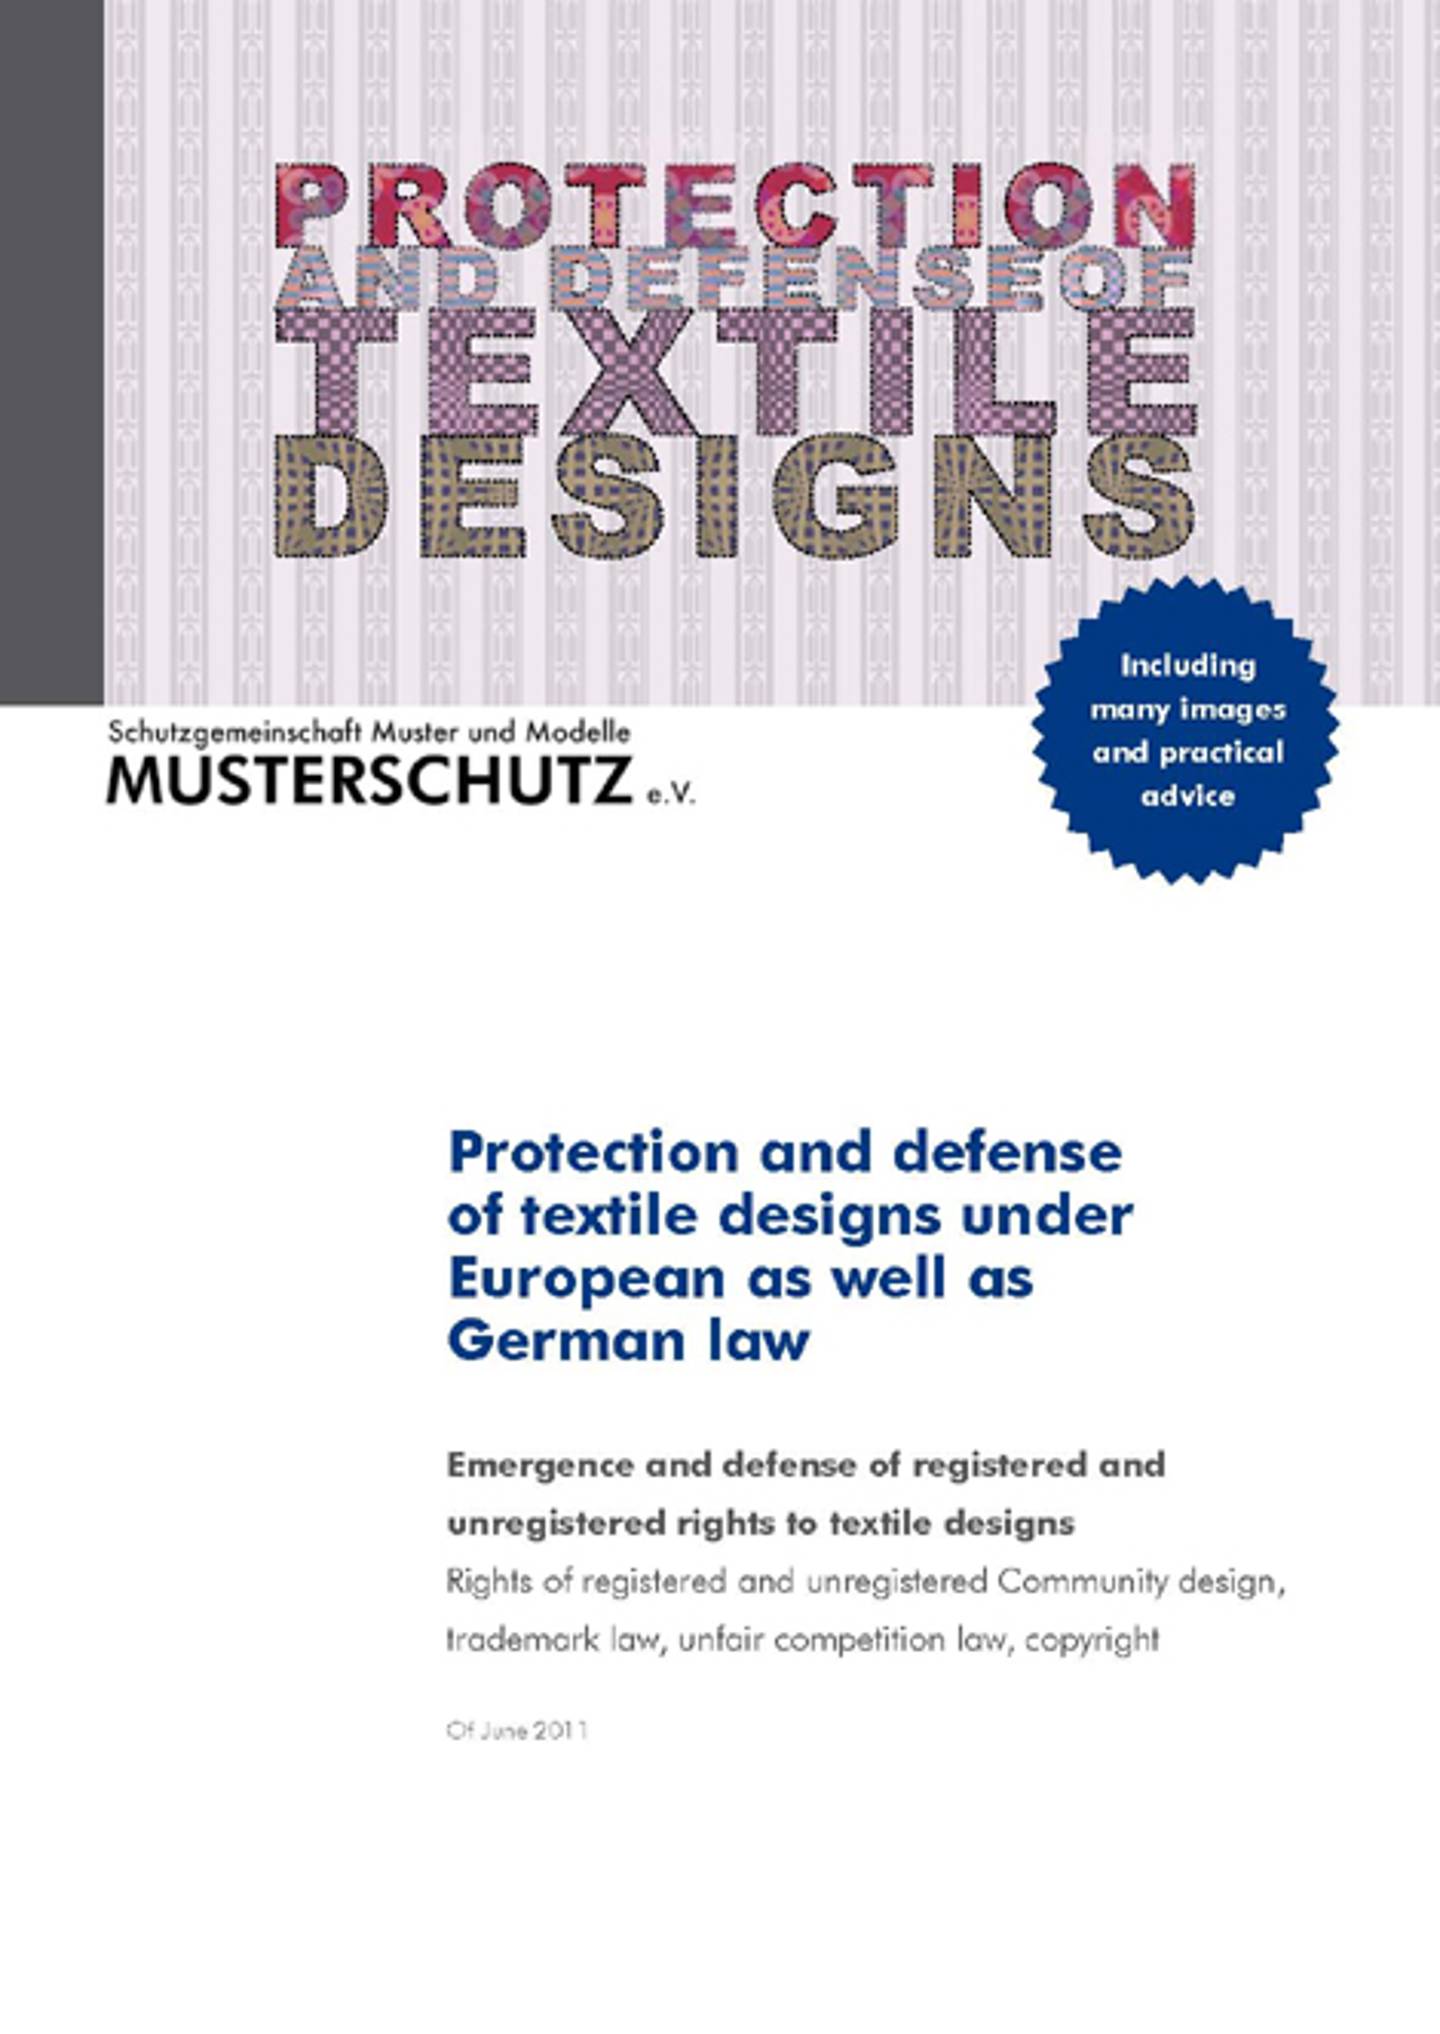 Free e-book on textile related design and trademark law